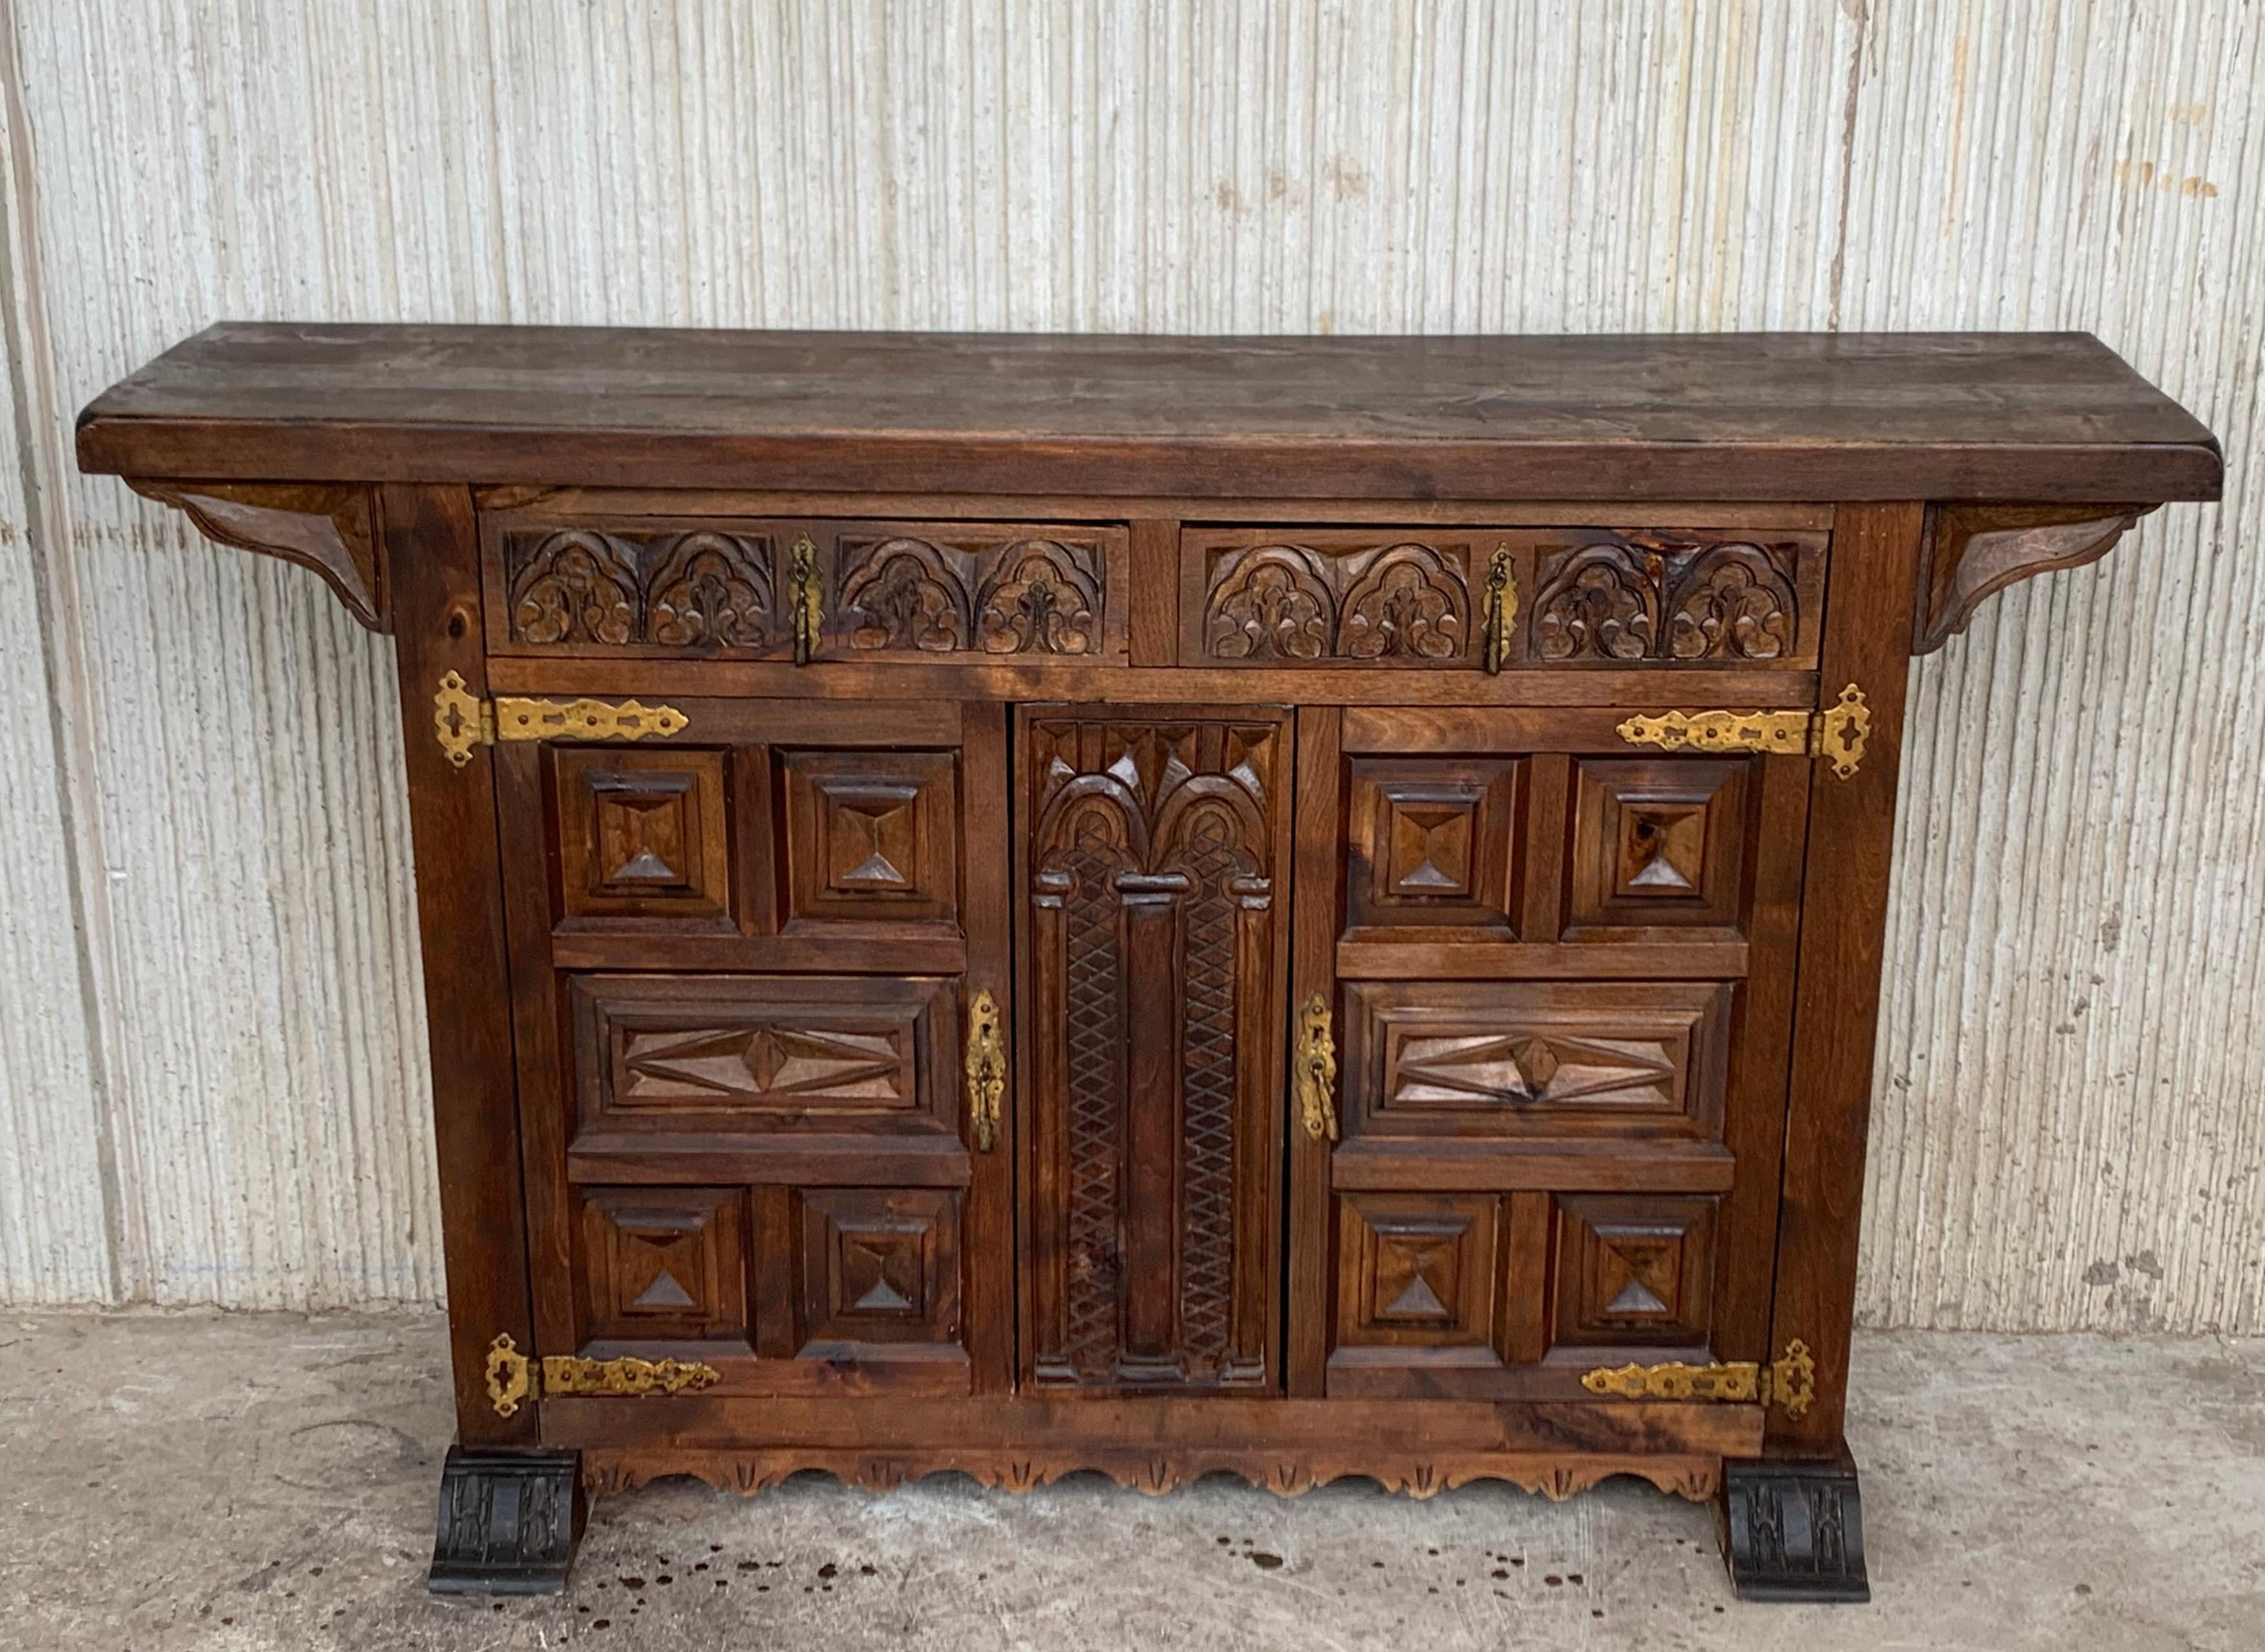 Very good quality carved Spanish cabinet cupboard, circa 1880. Beautifully carved in walnut, with good color and patina. Features six carved panels on the doors and two drawers with carved decoration with acanthus leaves and geometrical figures. The